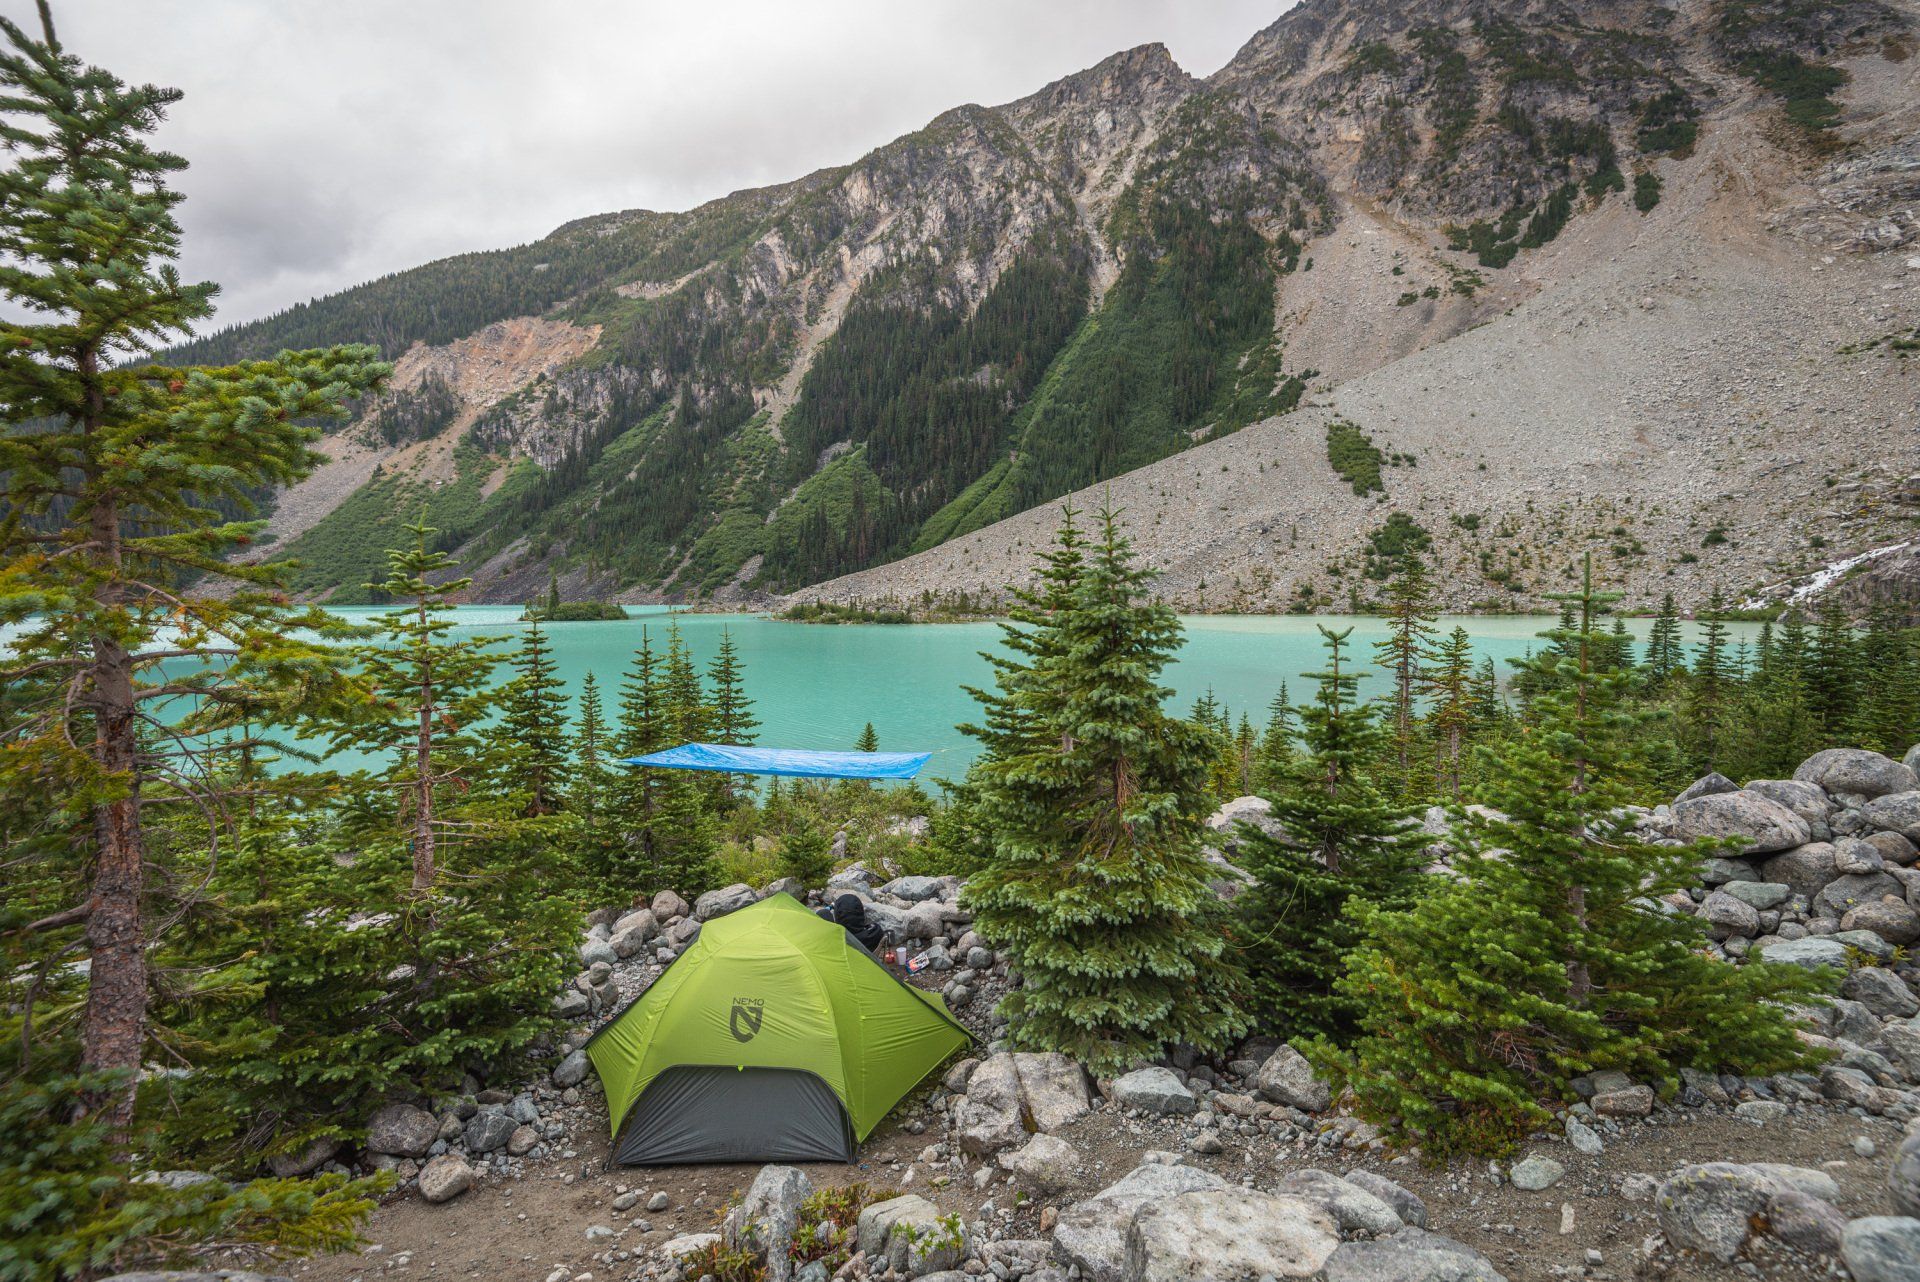 Nemo Dragonfly tent with a blue poly tarp hanging above, with a view of the upper Joffre lake, Joffre Lakes Provincial Park, BC, Canada